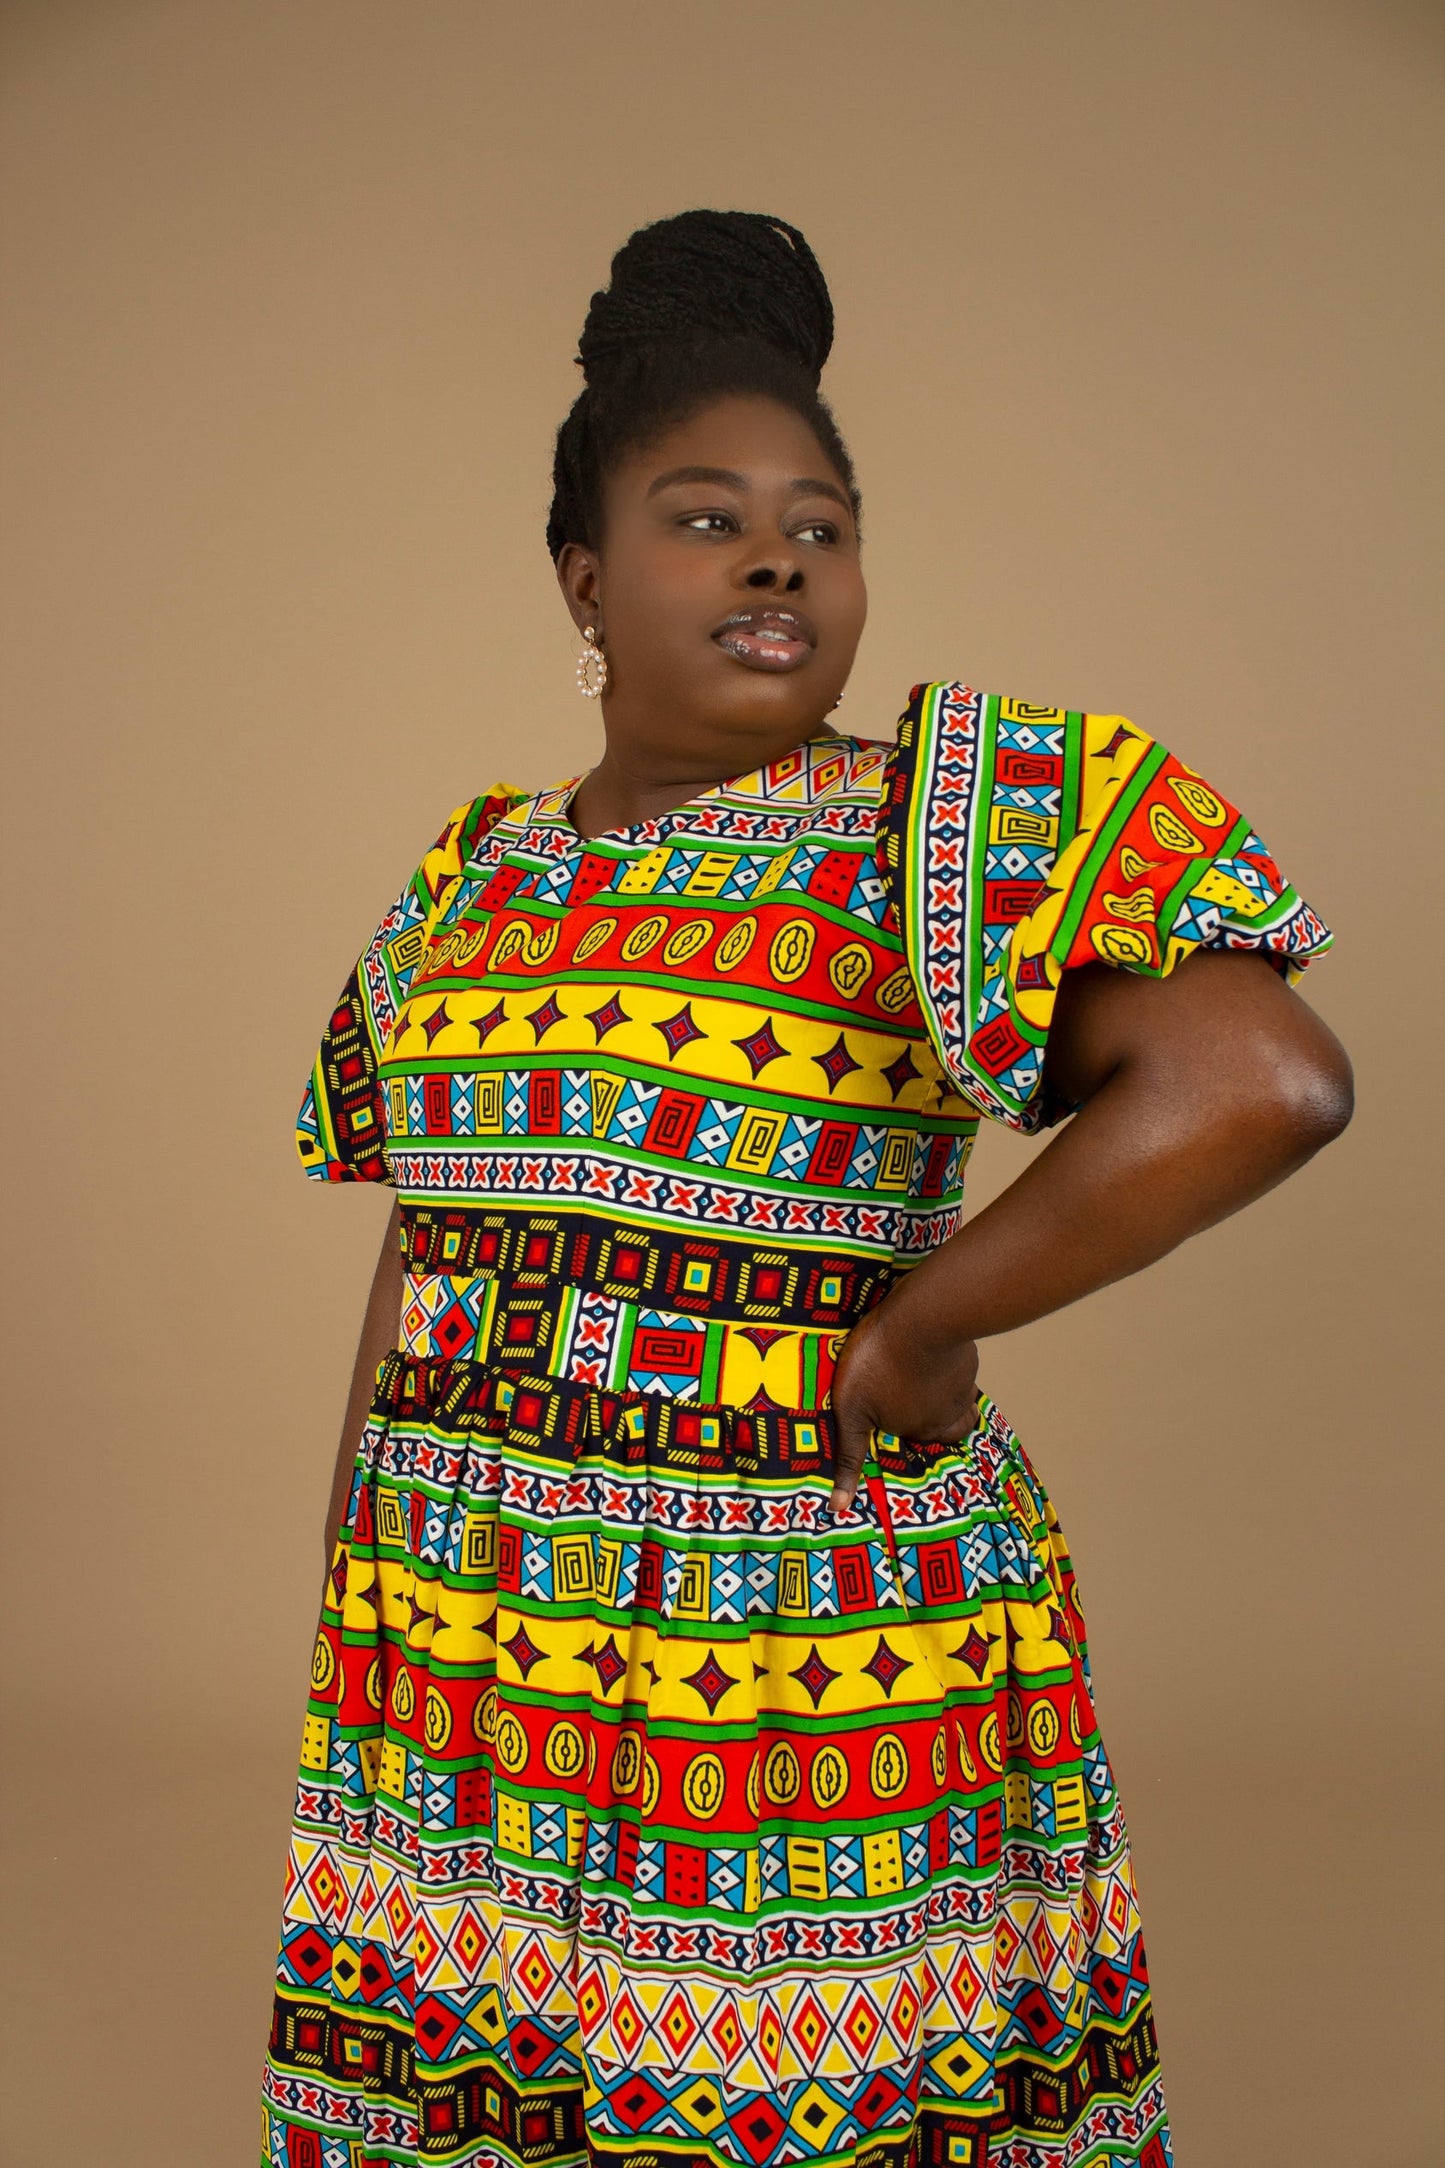 The Akala African Print Skater Dress is crafted from sustainable wax print and features two side pockets in a repeated multi-coloured geometric Kente pattern from cotton. Designed in England Made in Nigeria. Available in standard and plus sizes (UK 8-32).